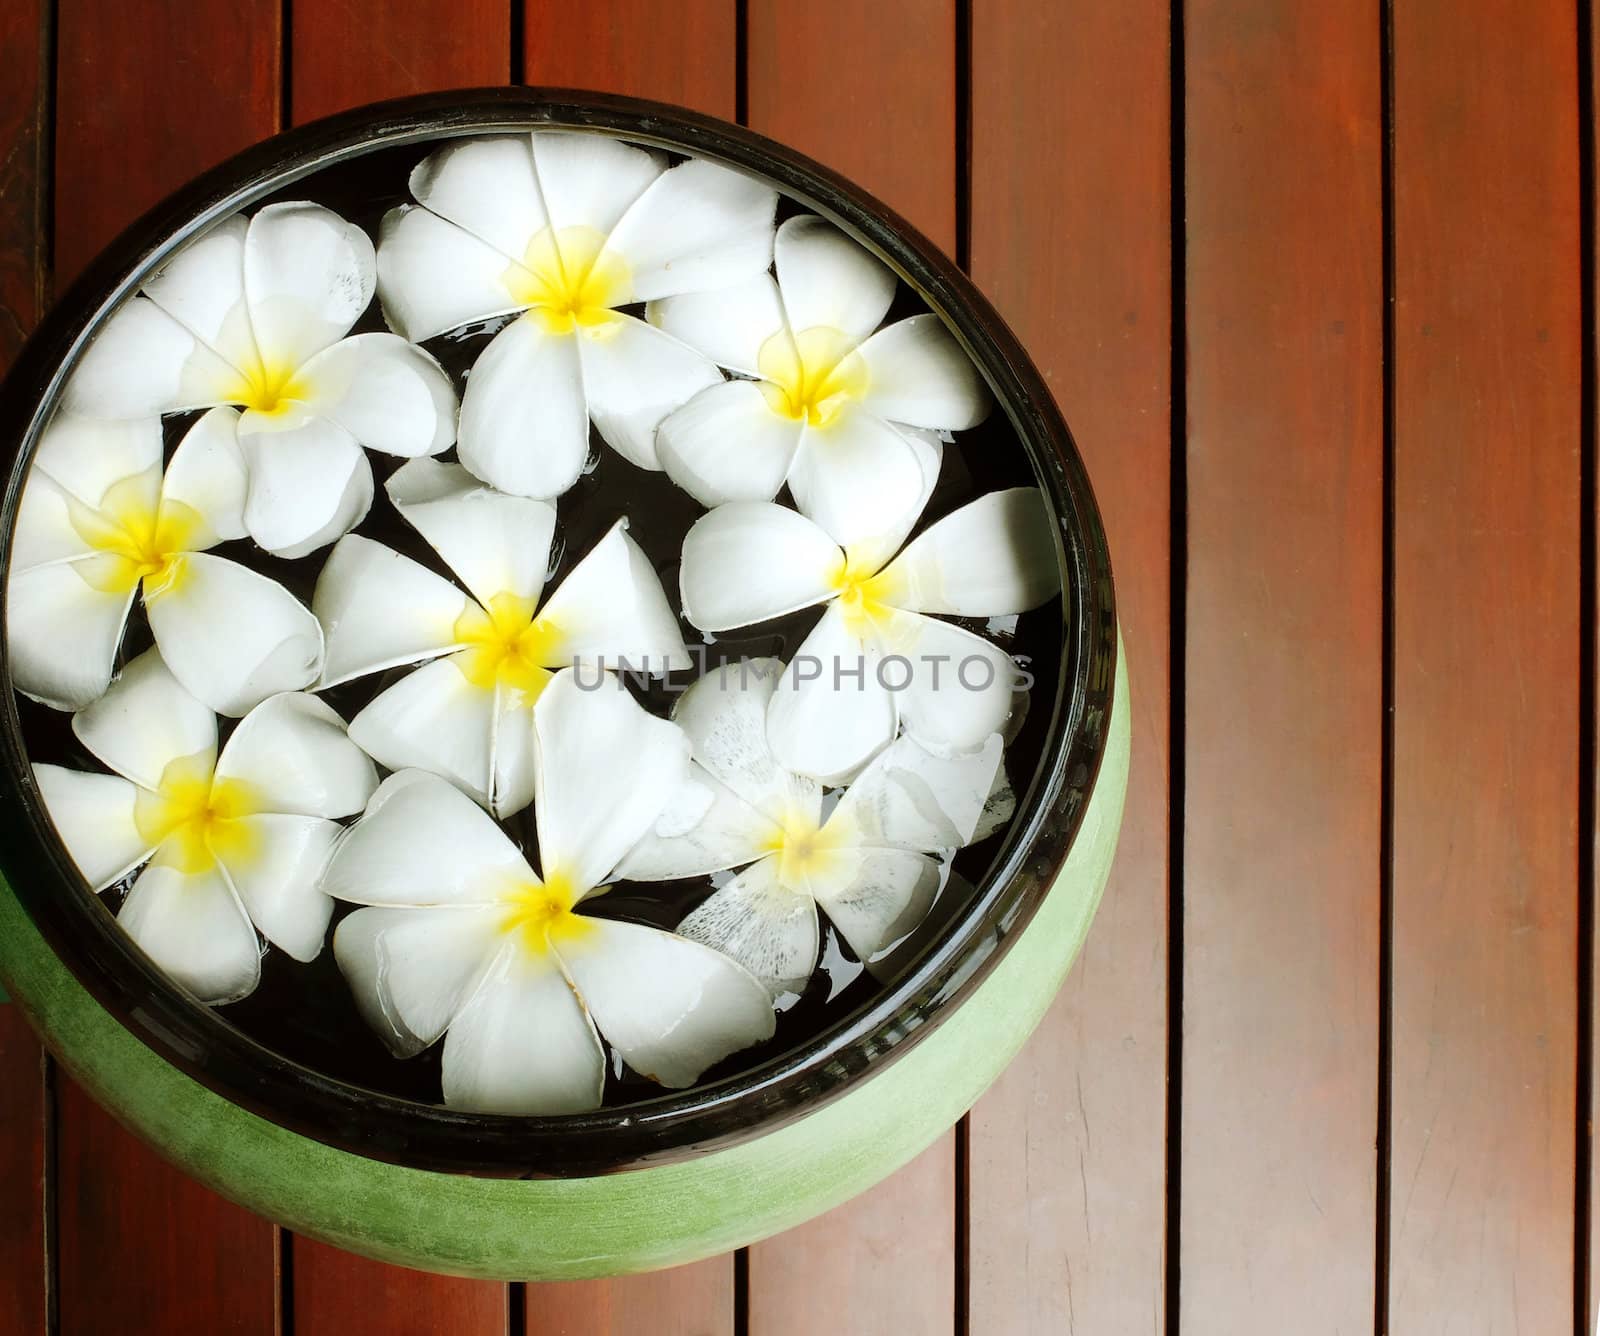 Frangipani flowers floating in the ancient bowl 